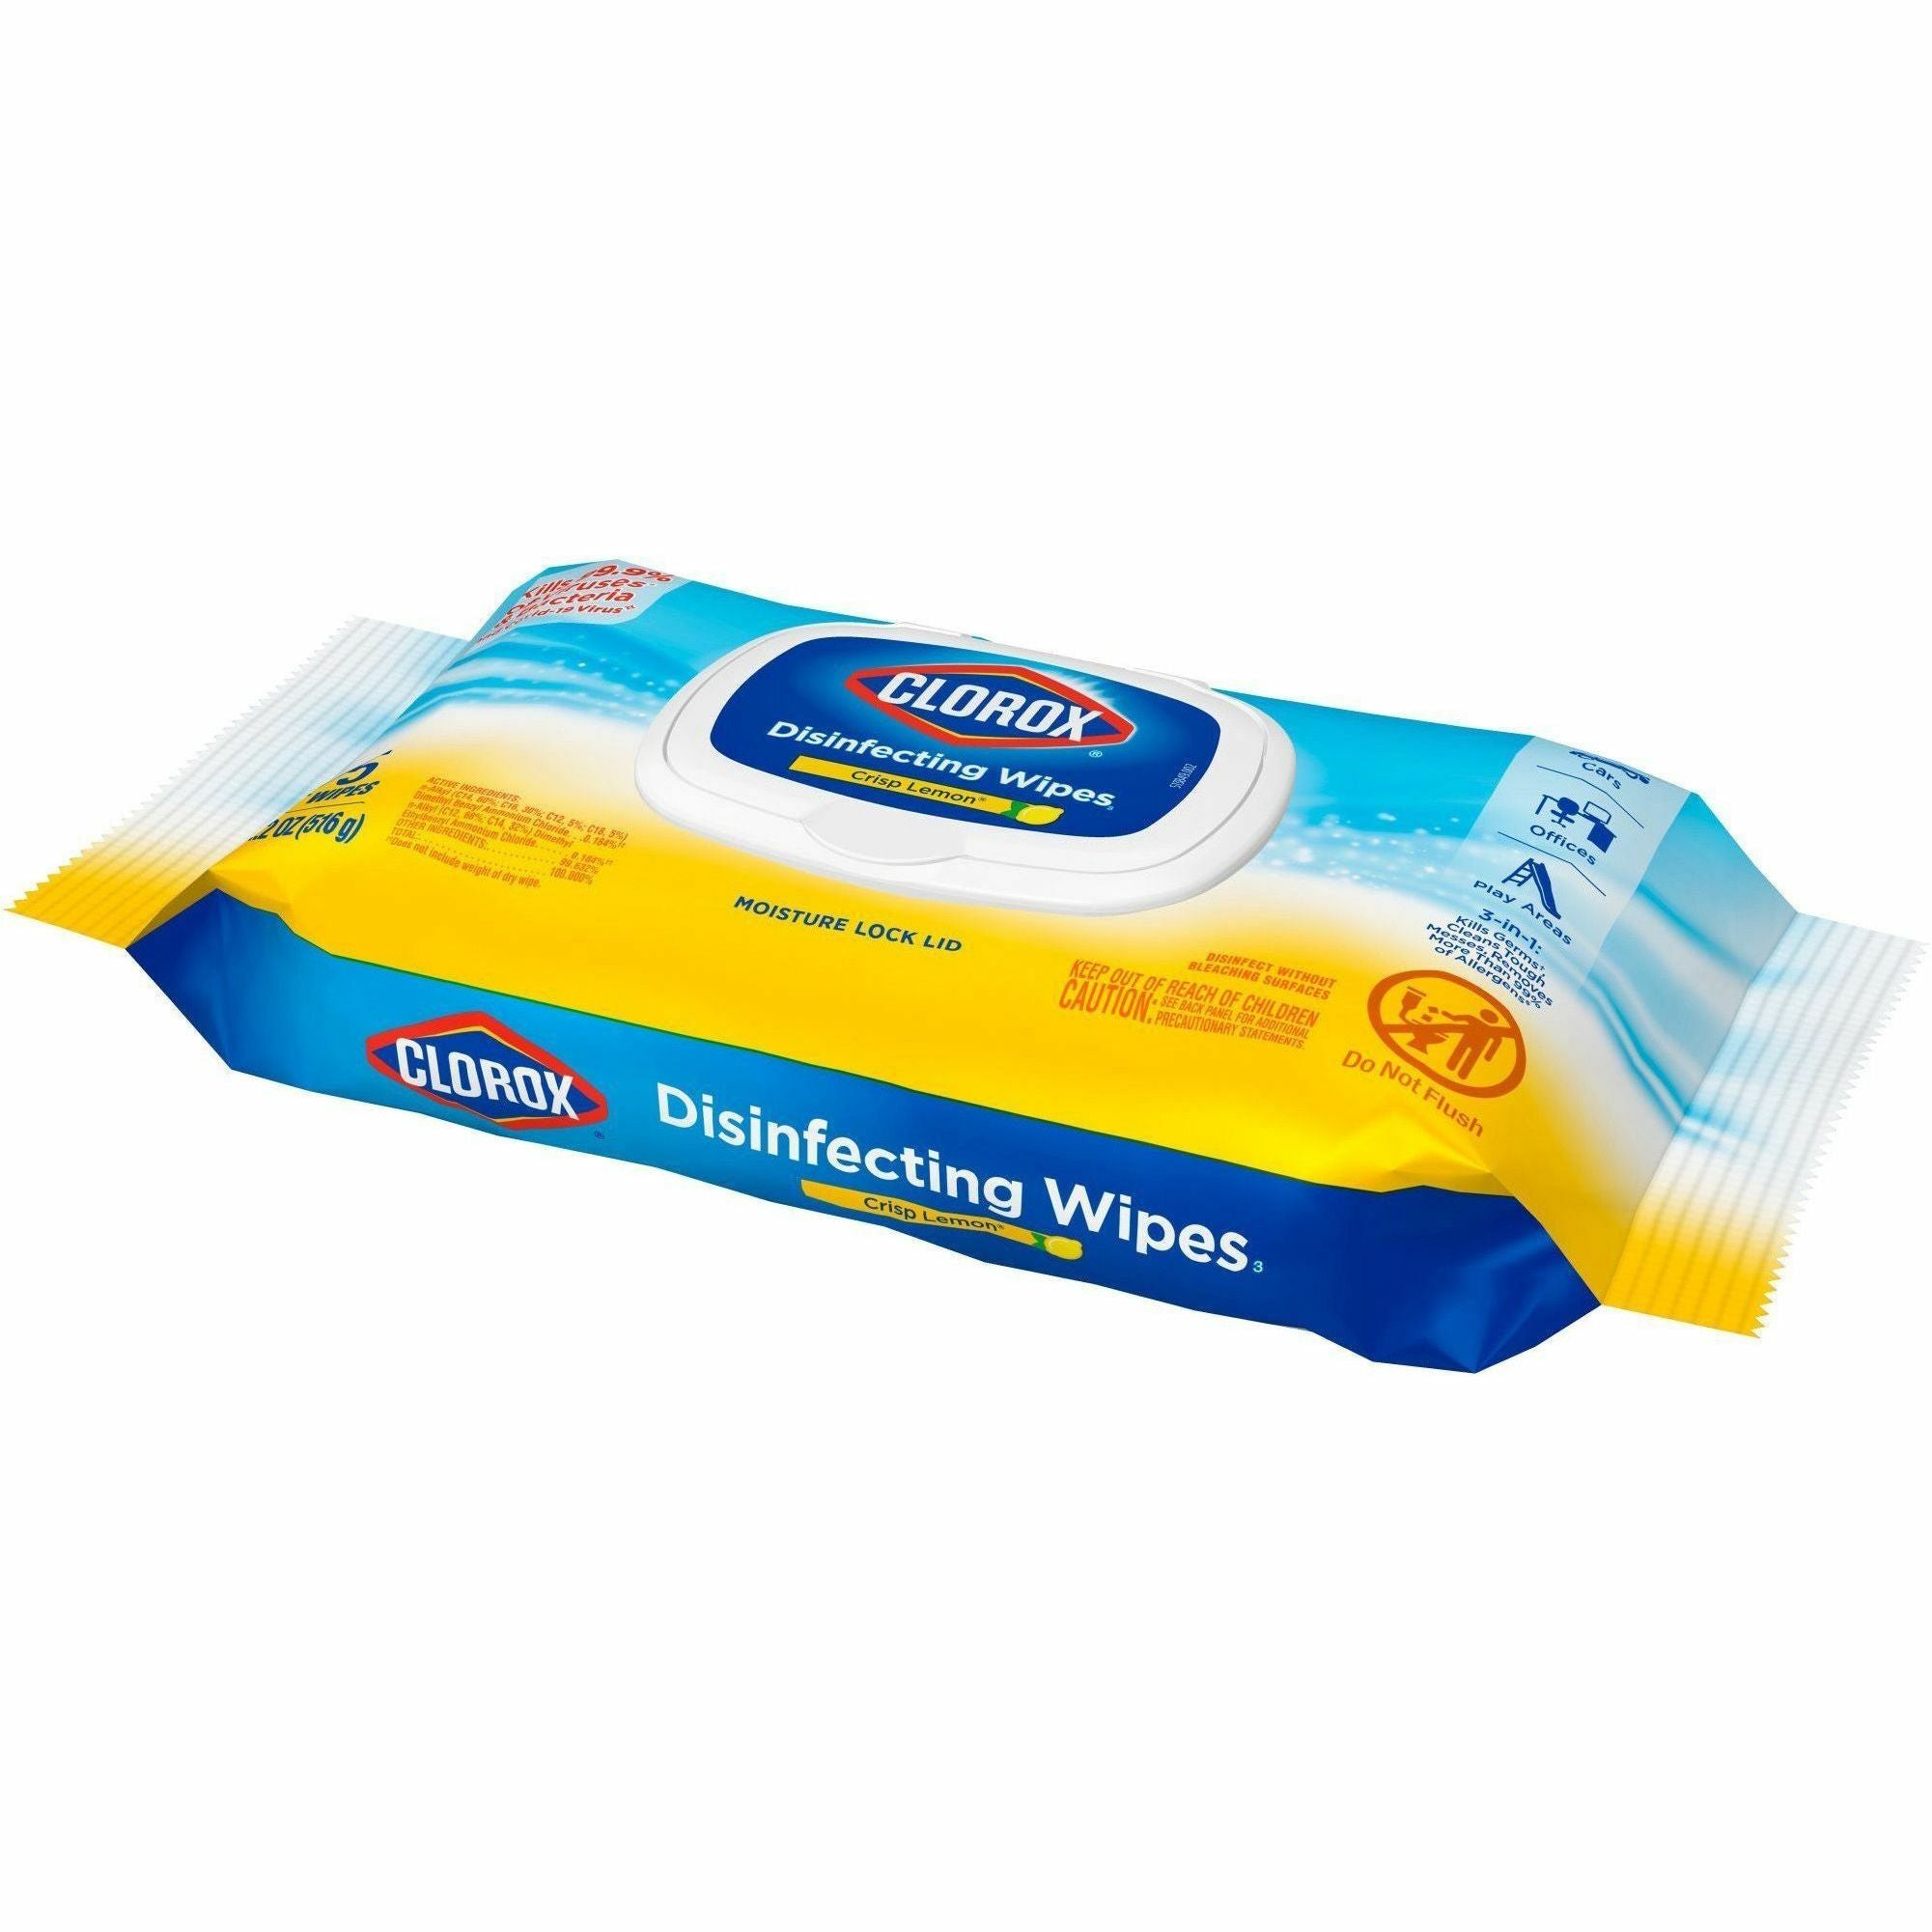 Clorox Bleach-free Disinfecting Cleaning Wipes - Crisp Lemon Scent - 75 / Packet - 600 / Pallet - Bleach-free, Antibacterial - White - 3